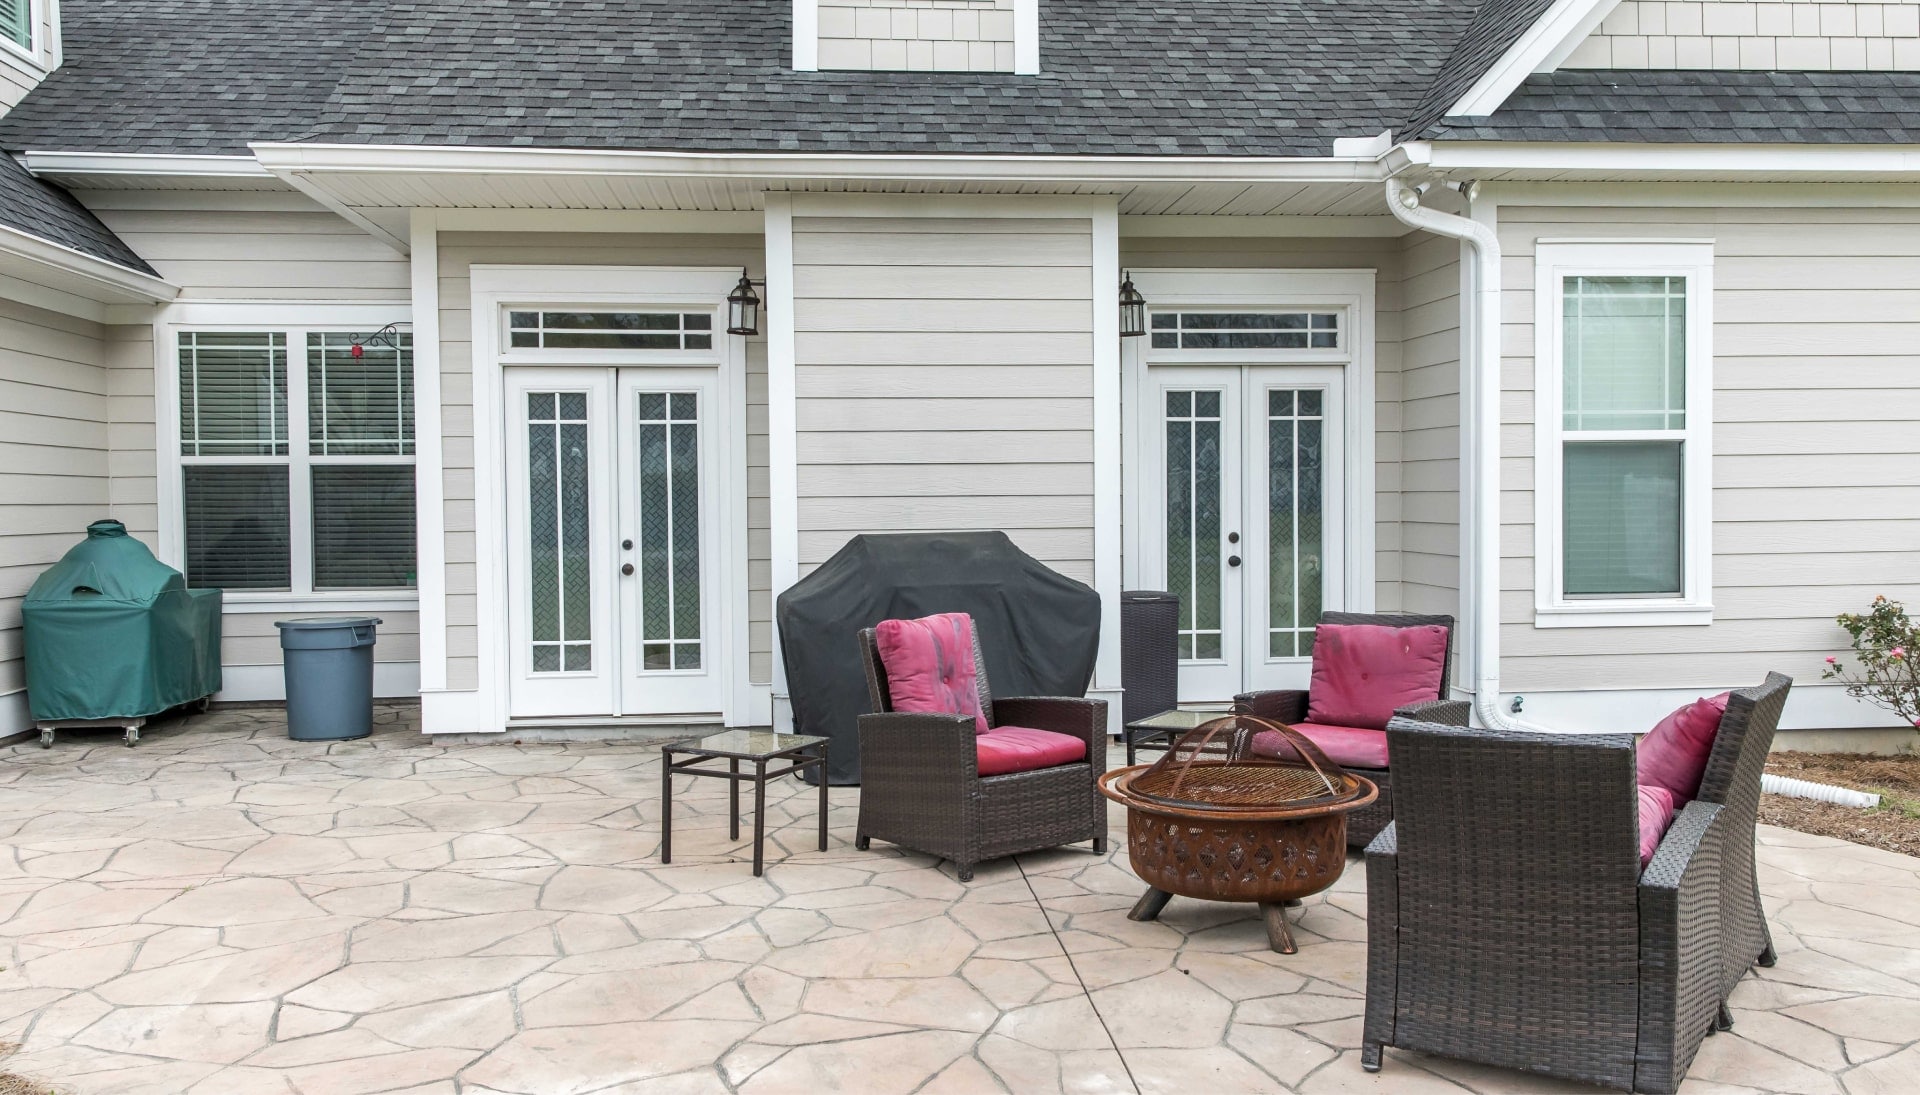 Elevate Your Outdoor Living Space with Stunning Stamped Concrete Patio in Mesa, AZ - Choose from a Variety of Creative Patterns and Colors to Achieve a Unique and Eye-Catching Look for Your Patio with Long-Lasting Durability and Low-Maintenance.